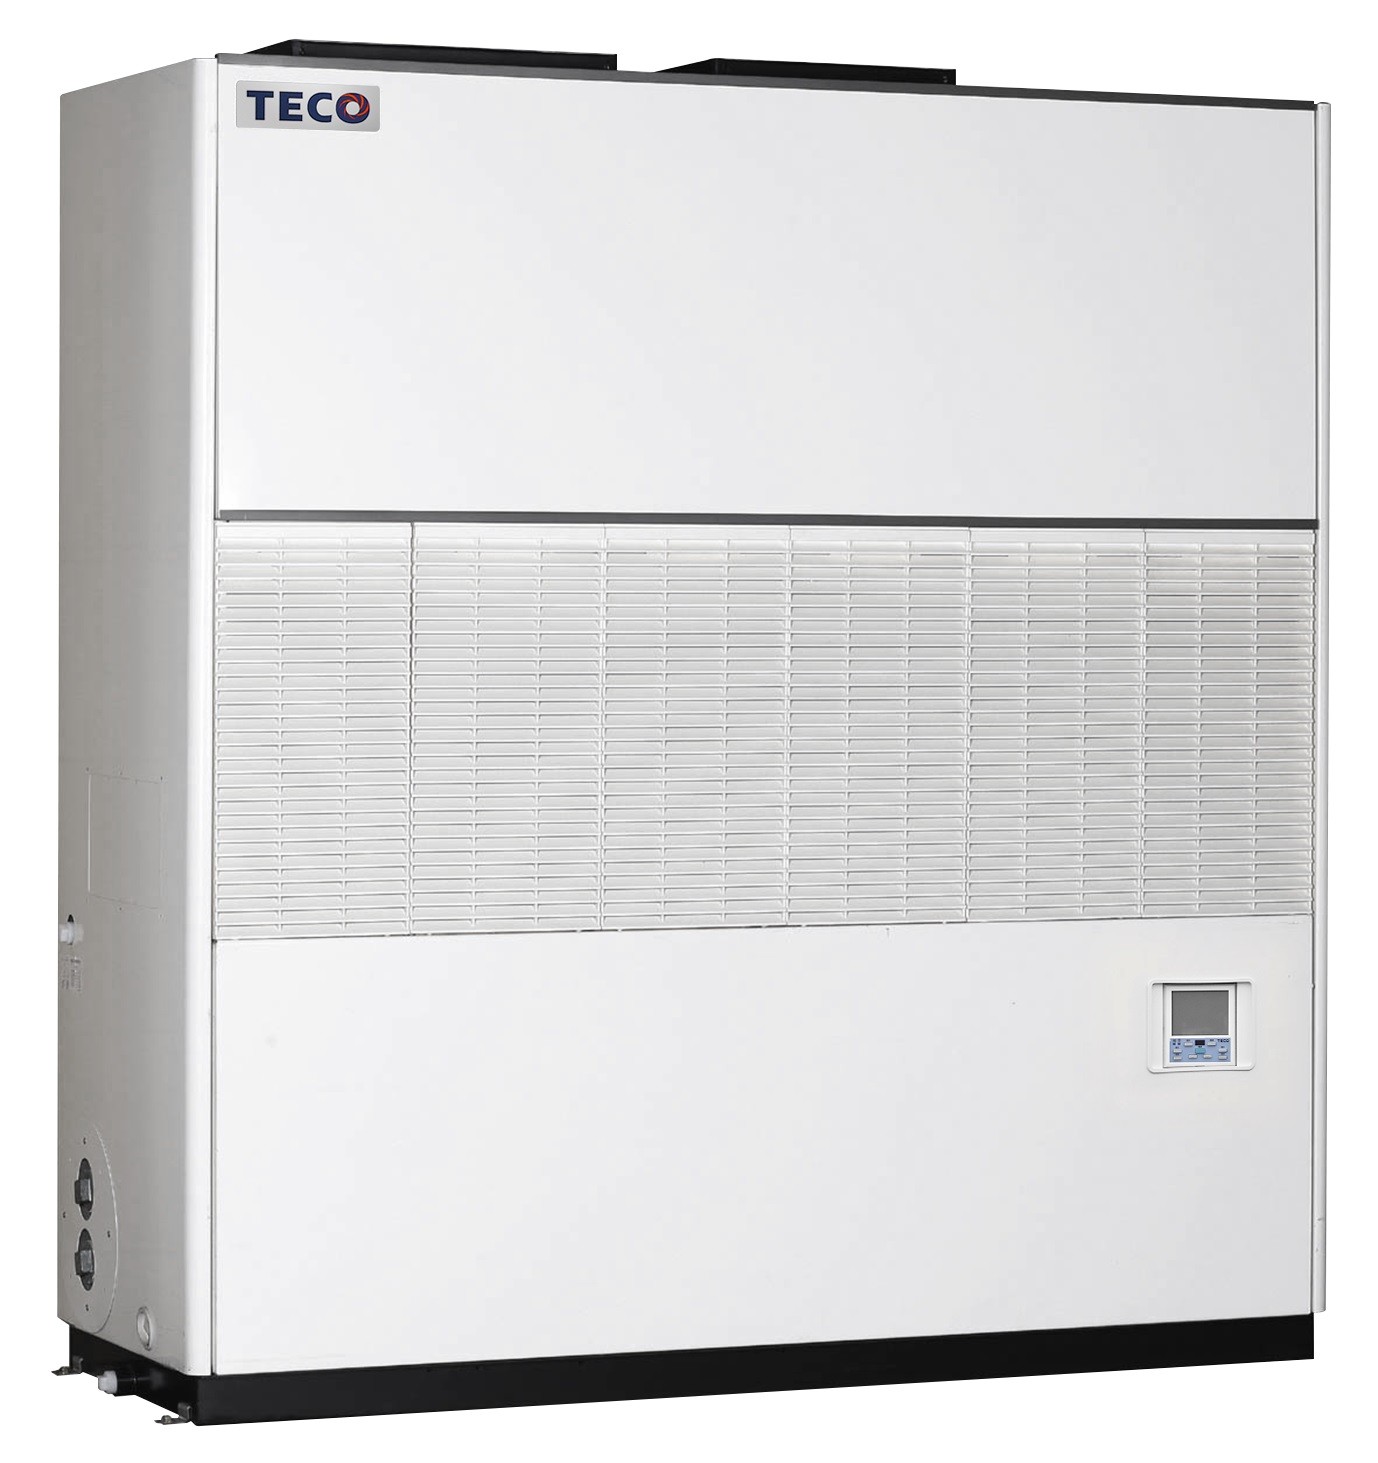 Smart Dual-power Generation System Water-cooled Inverter Commerical ACs / TECO ELECTRIC & MACHINERY CO., LTD.